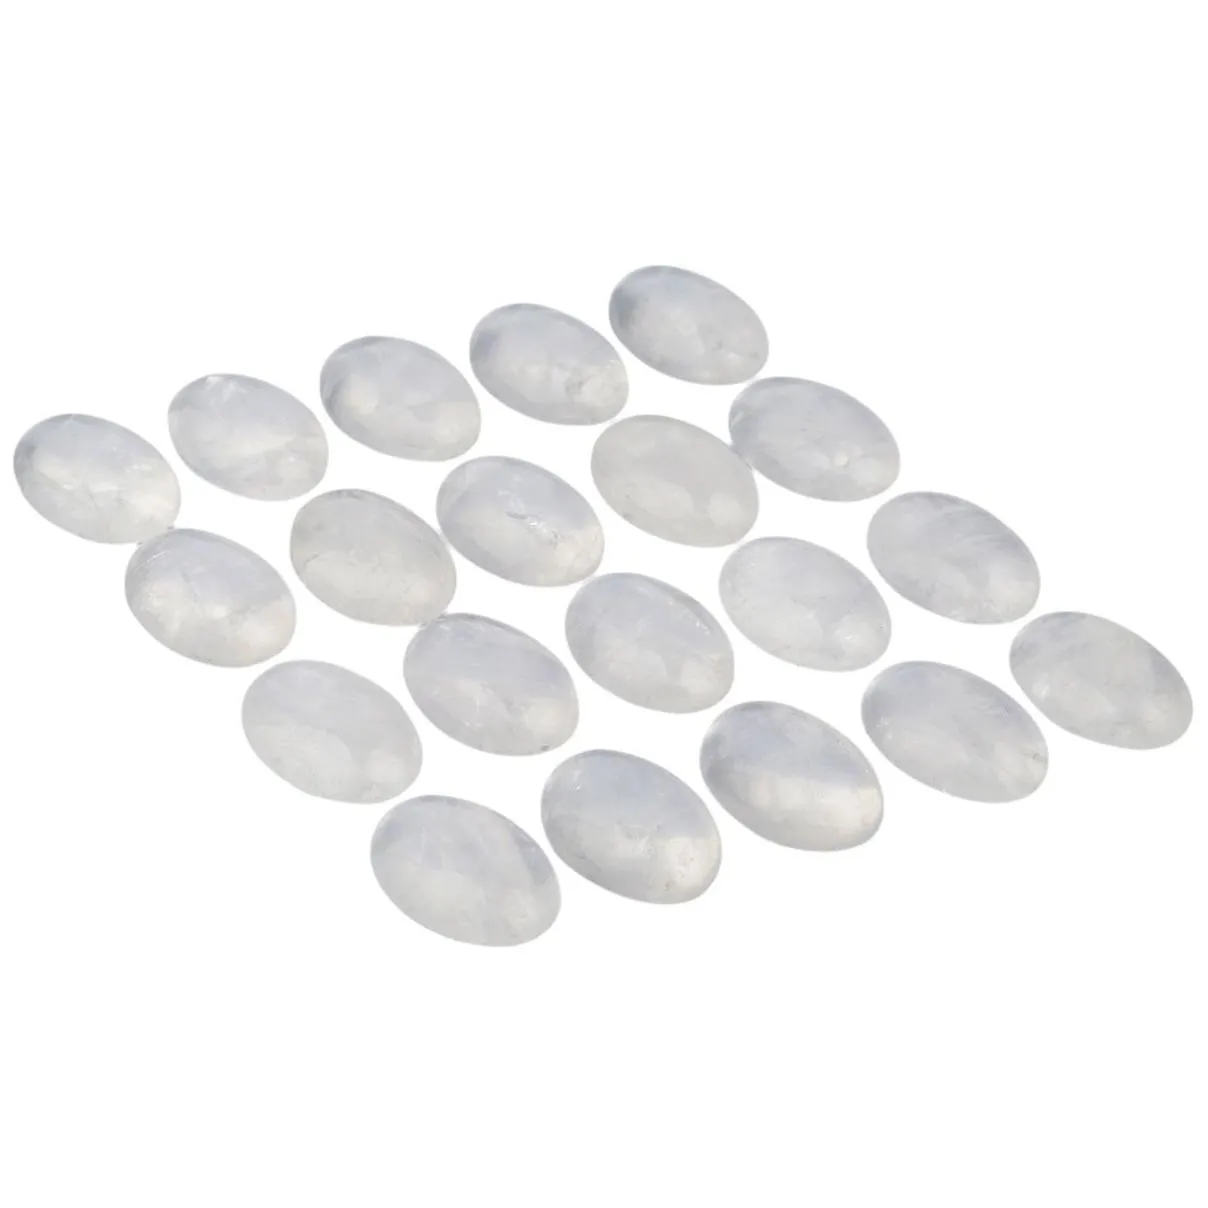 Natural Quartz Crystal Oval Flat Back Gemstone Cabochons Healing Chakra Stone Bead Cab Covers No Hole for Jewelry Craft Making